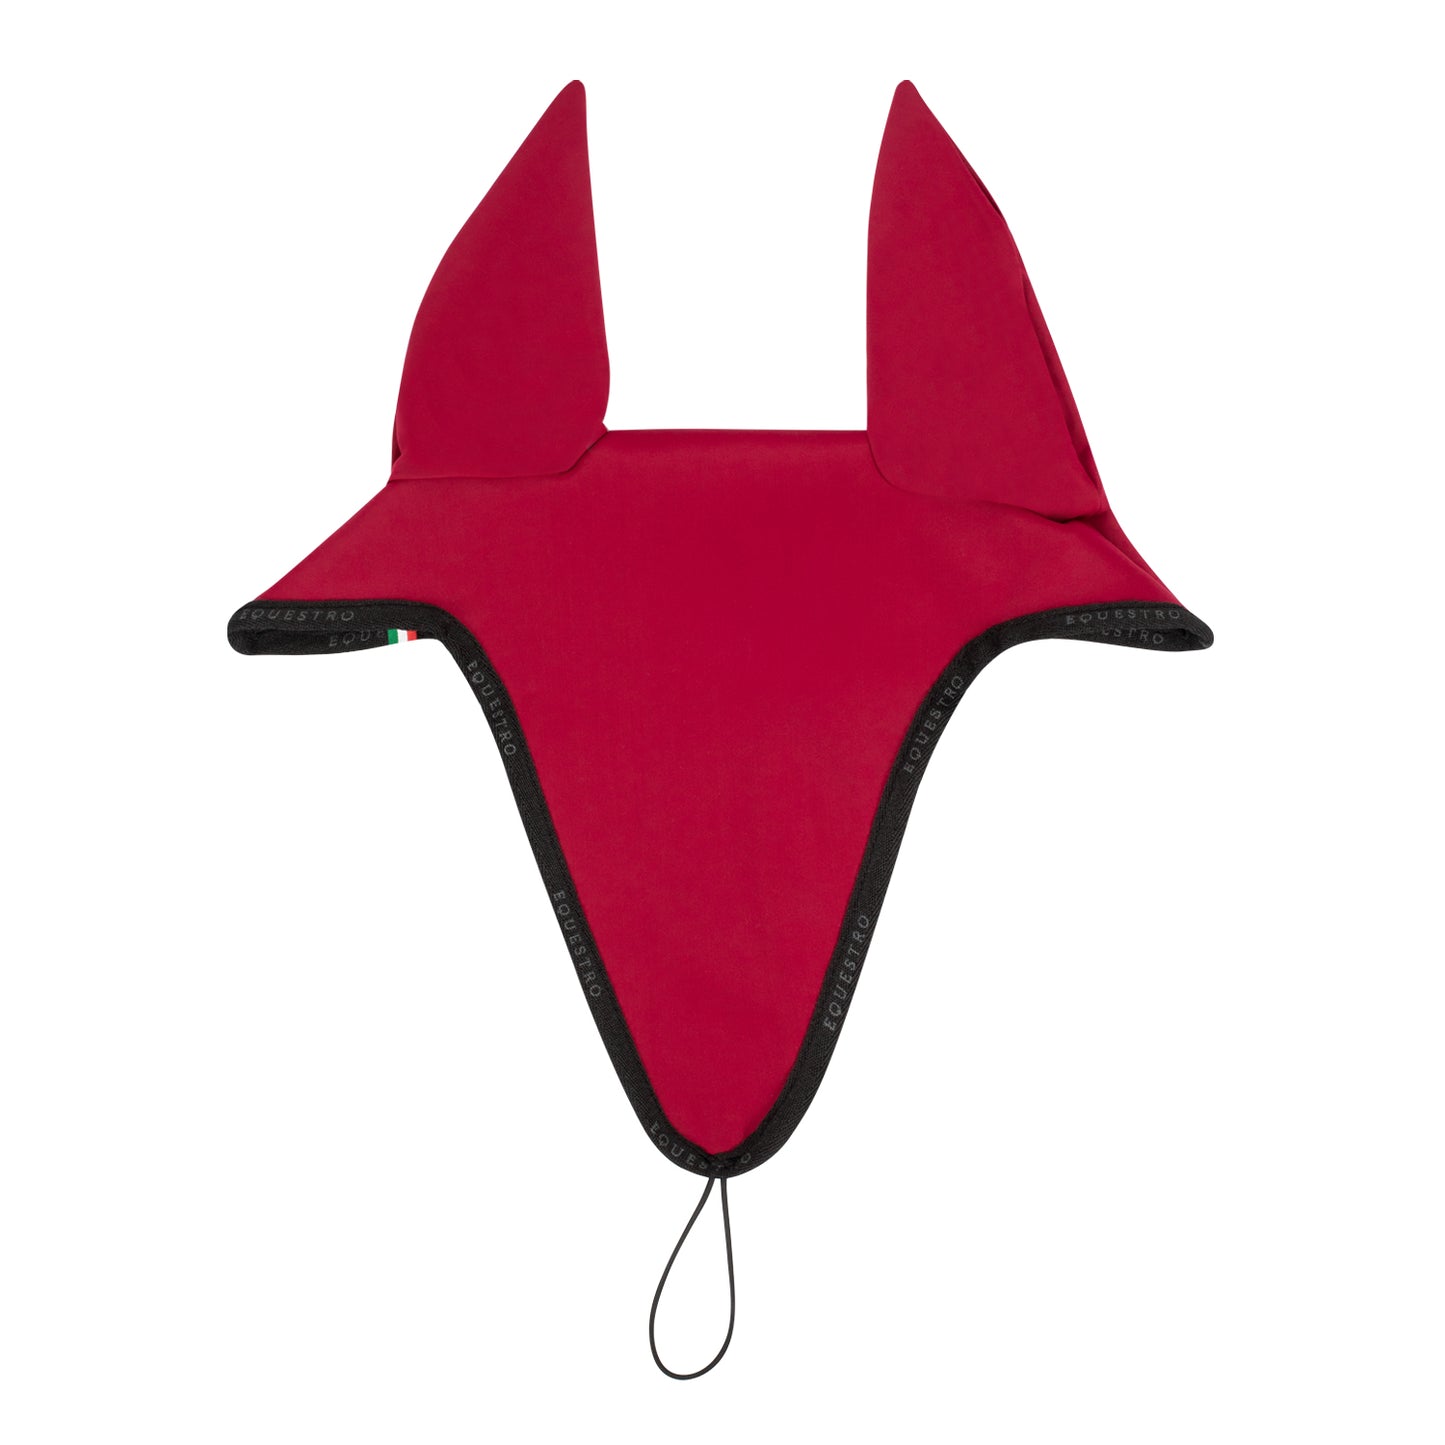 EQUESTRO - Fly Veil in Technical Fabric with Noseband Attachment